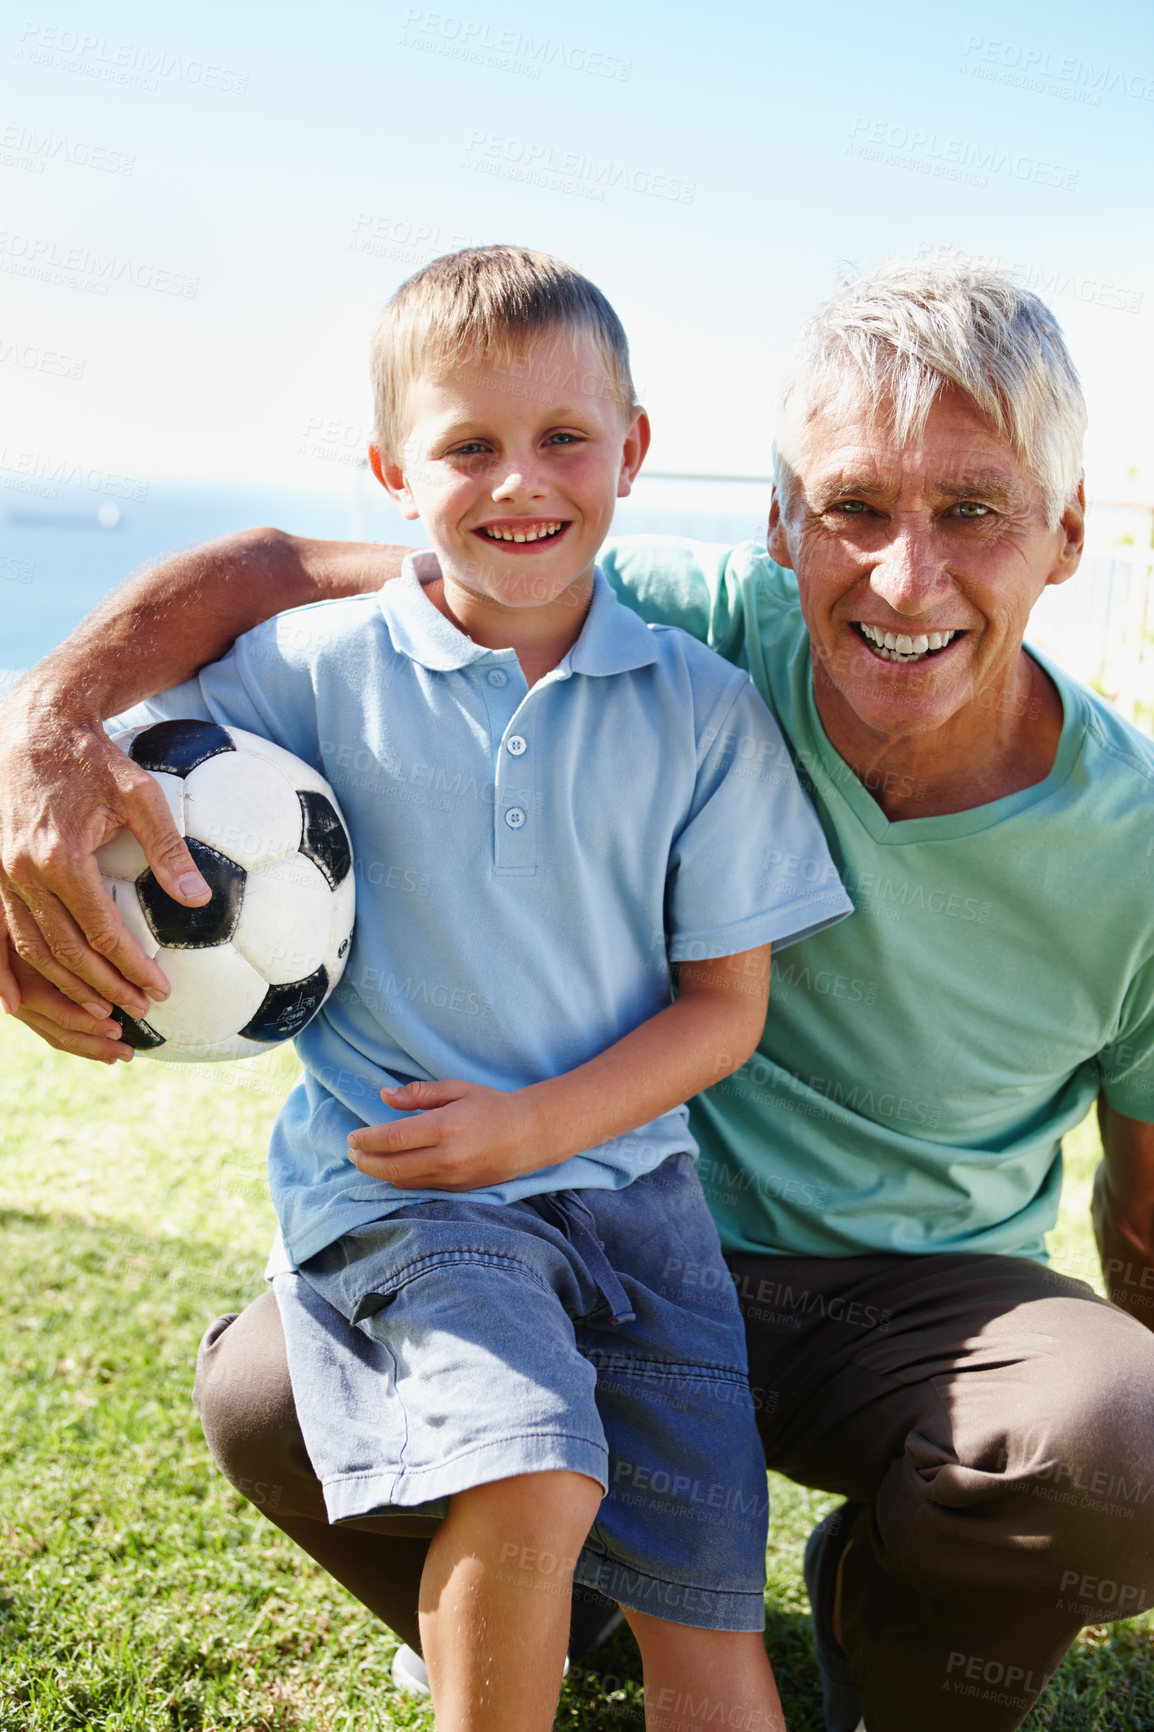 Buy stock photo Senior man, child and football happy in portrait outdoor on field for training, exercise or development. Grandpa, excited and kid smiling on soccer pitch for playing, fitness or bonding in retirement